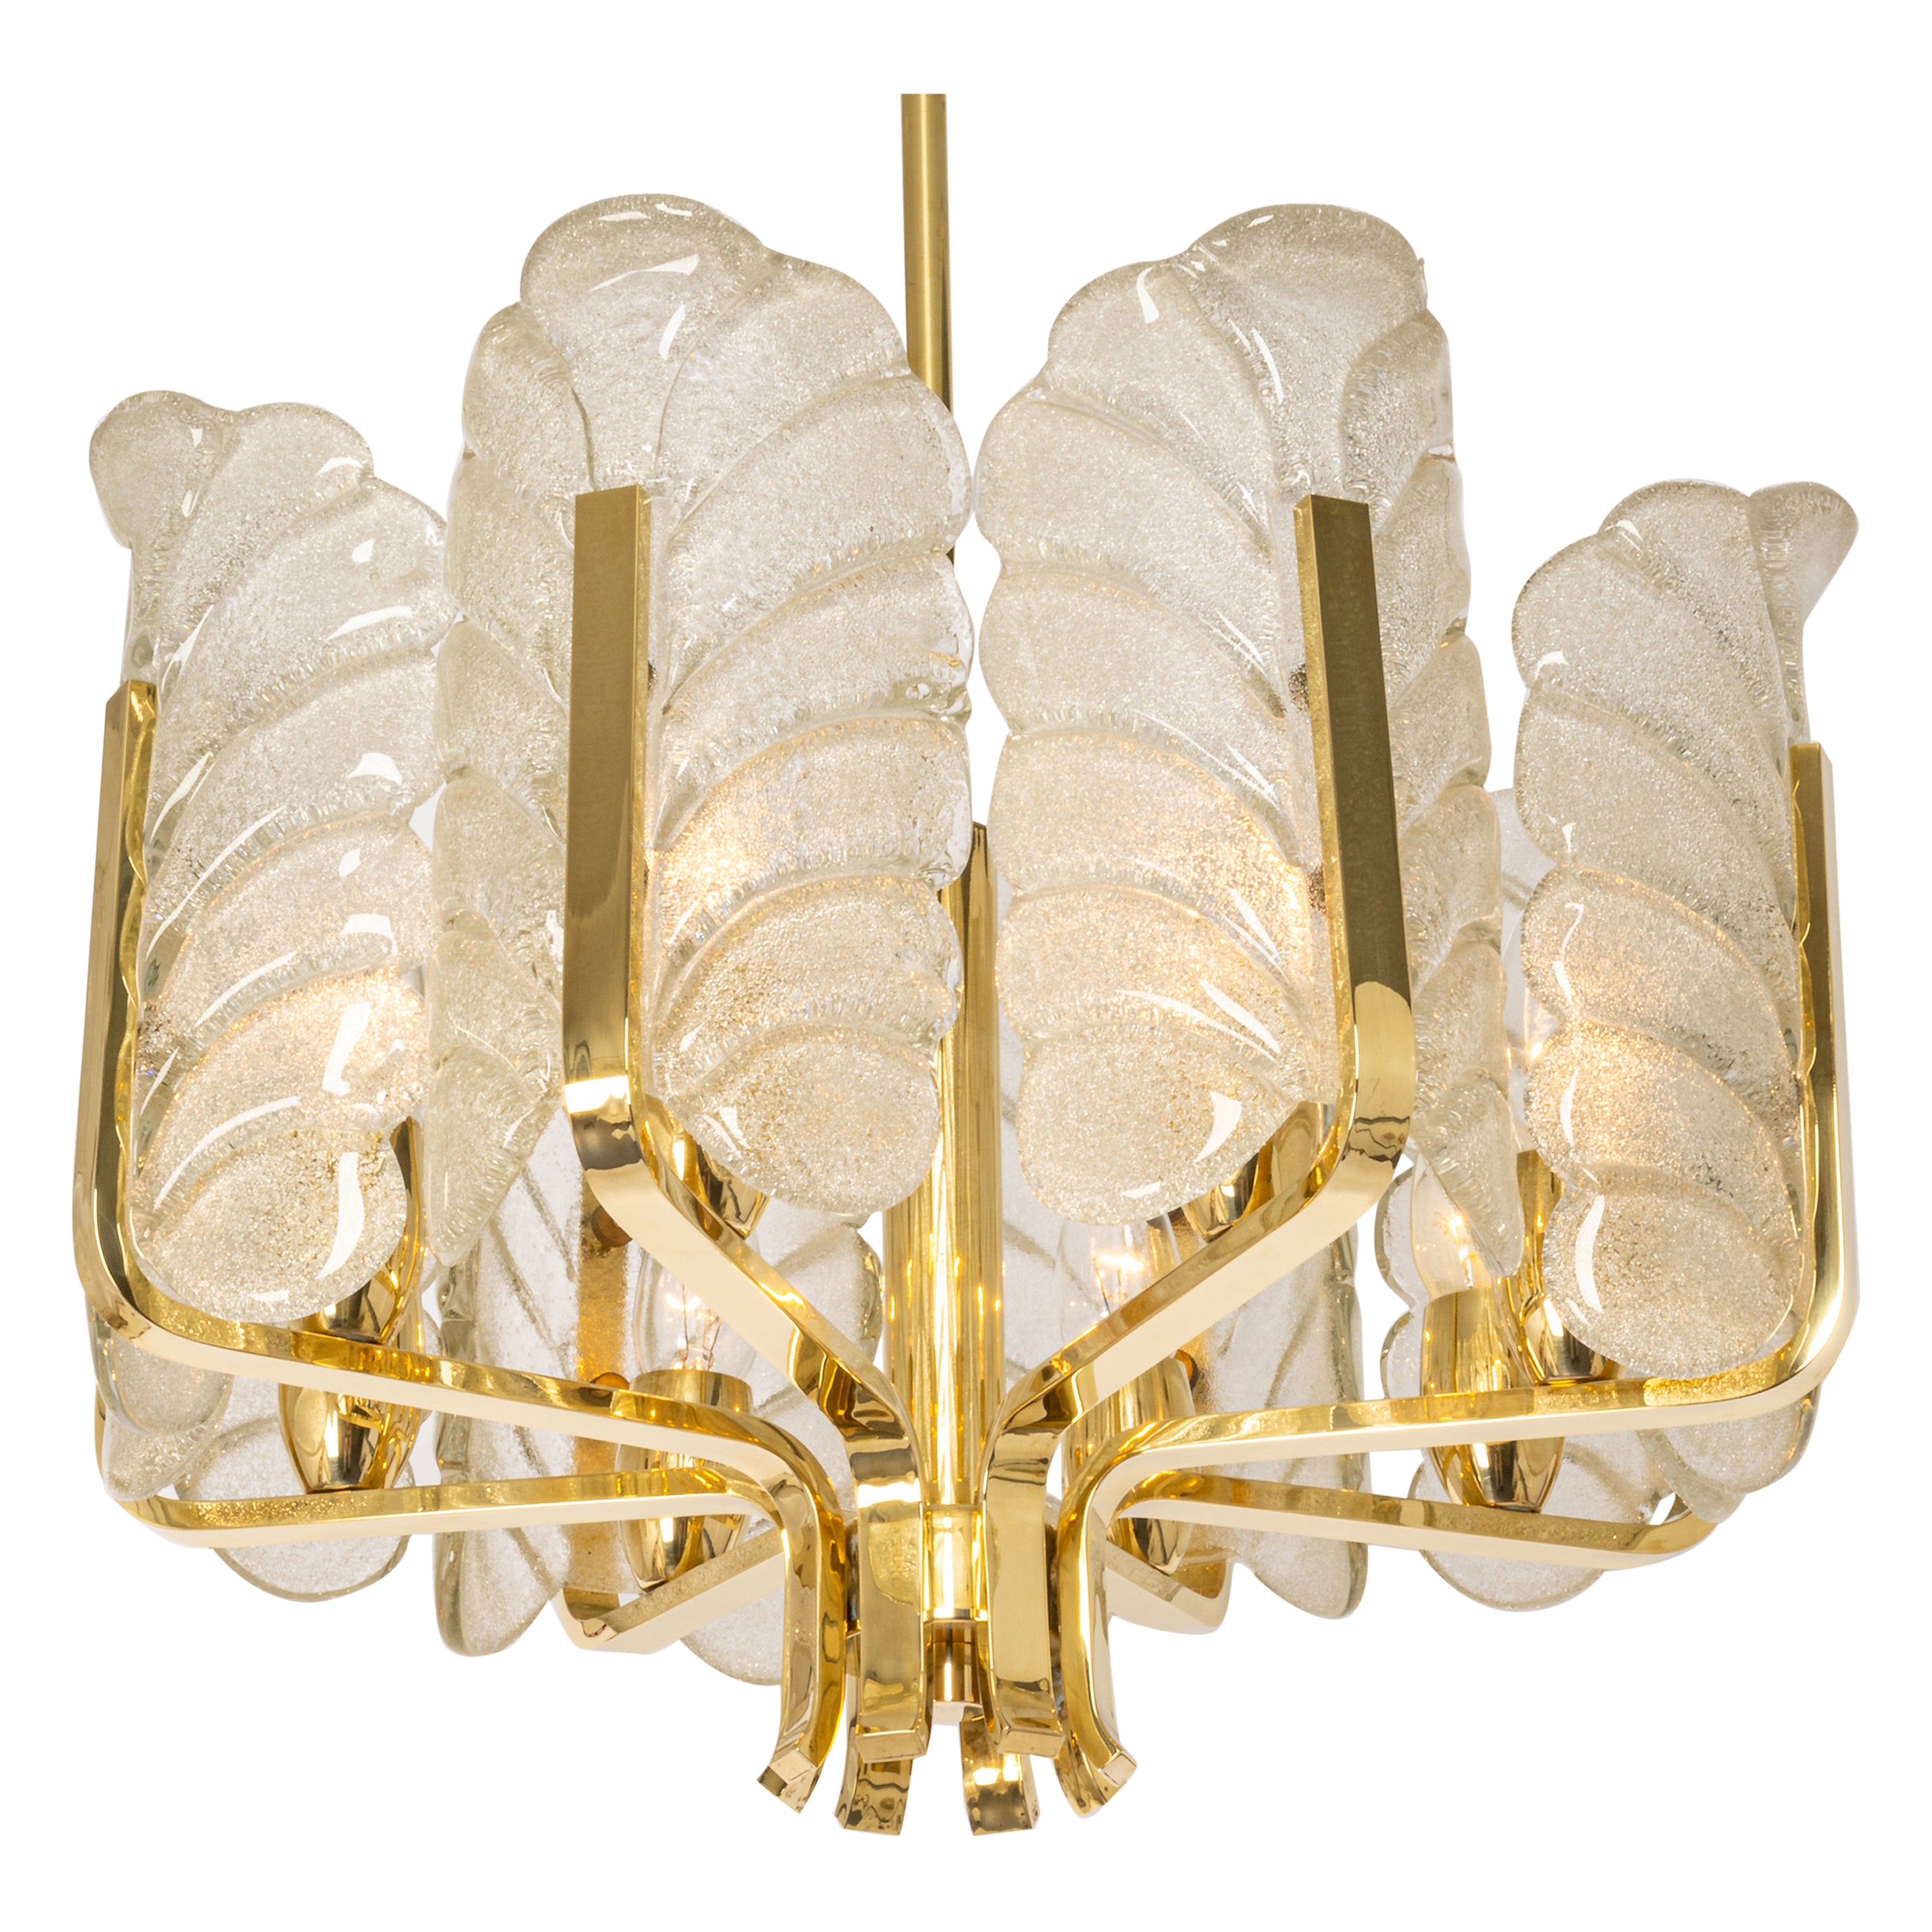 1 of 4 Stunning Carl Fagerlund Chandelier Murano Glass Leaves, 1960s